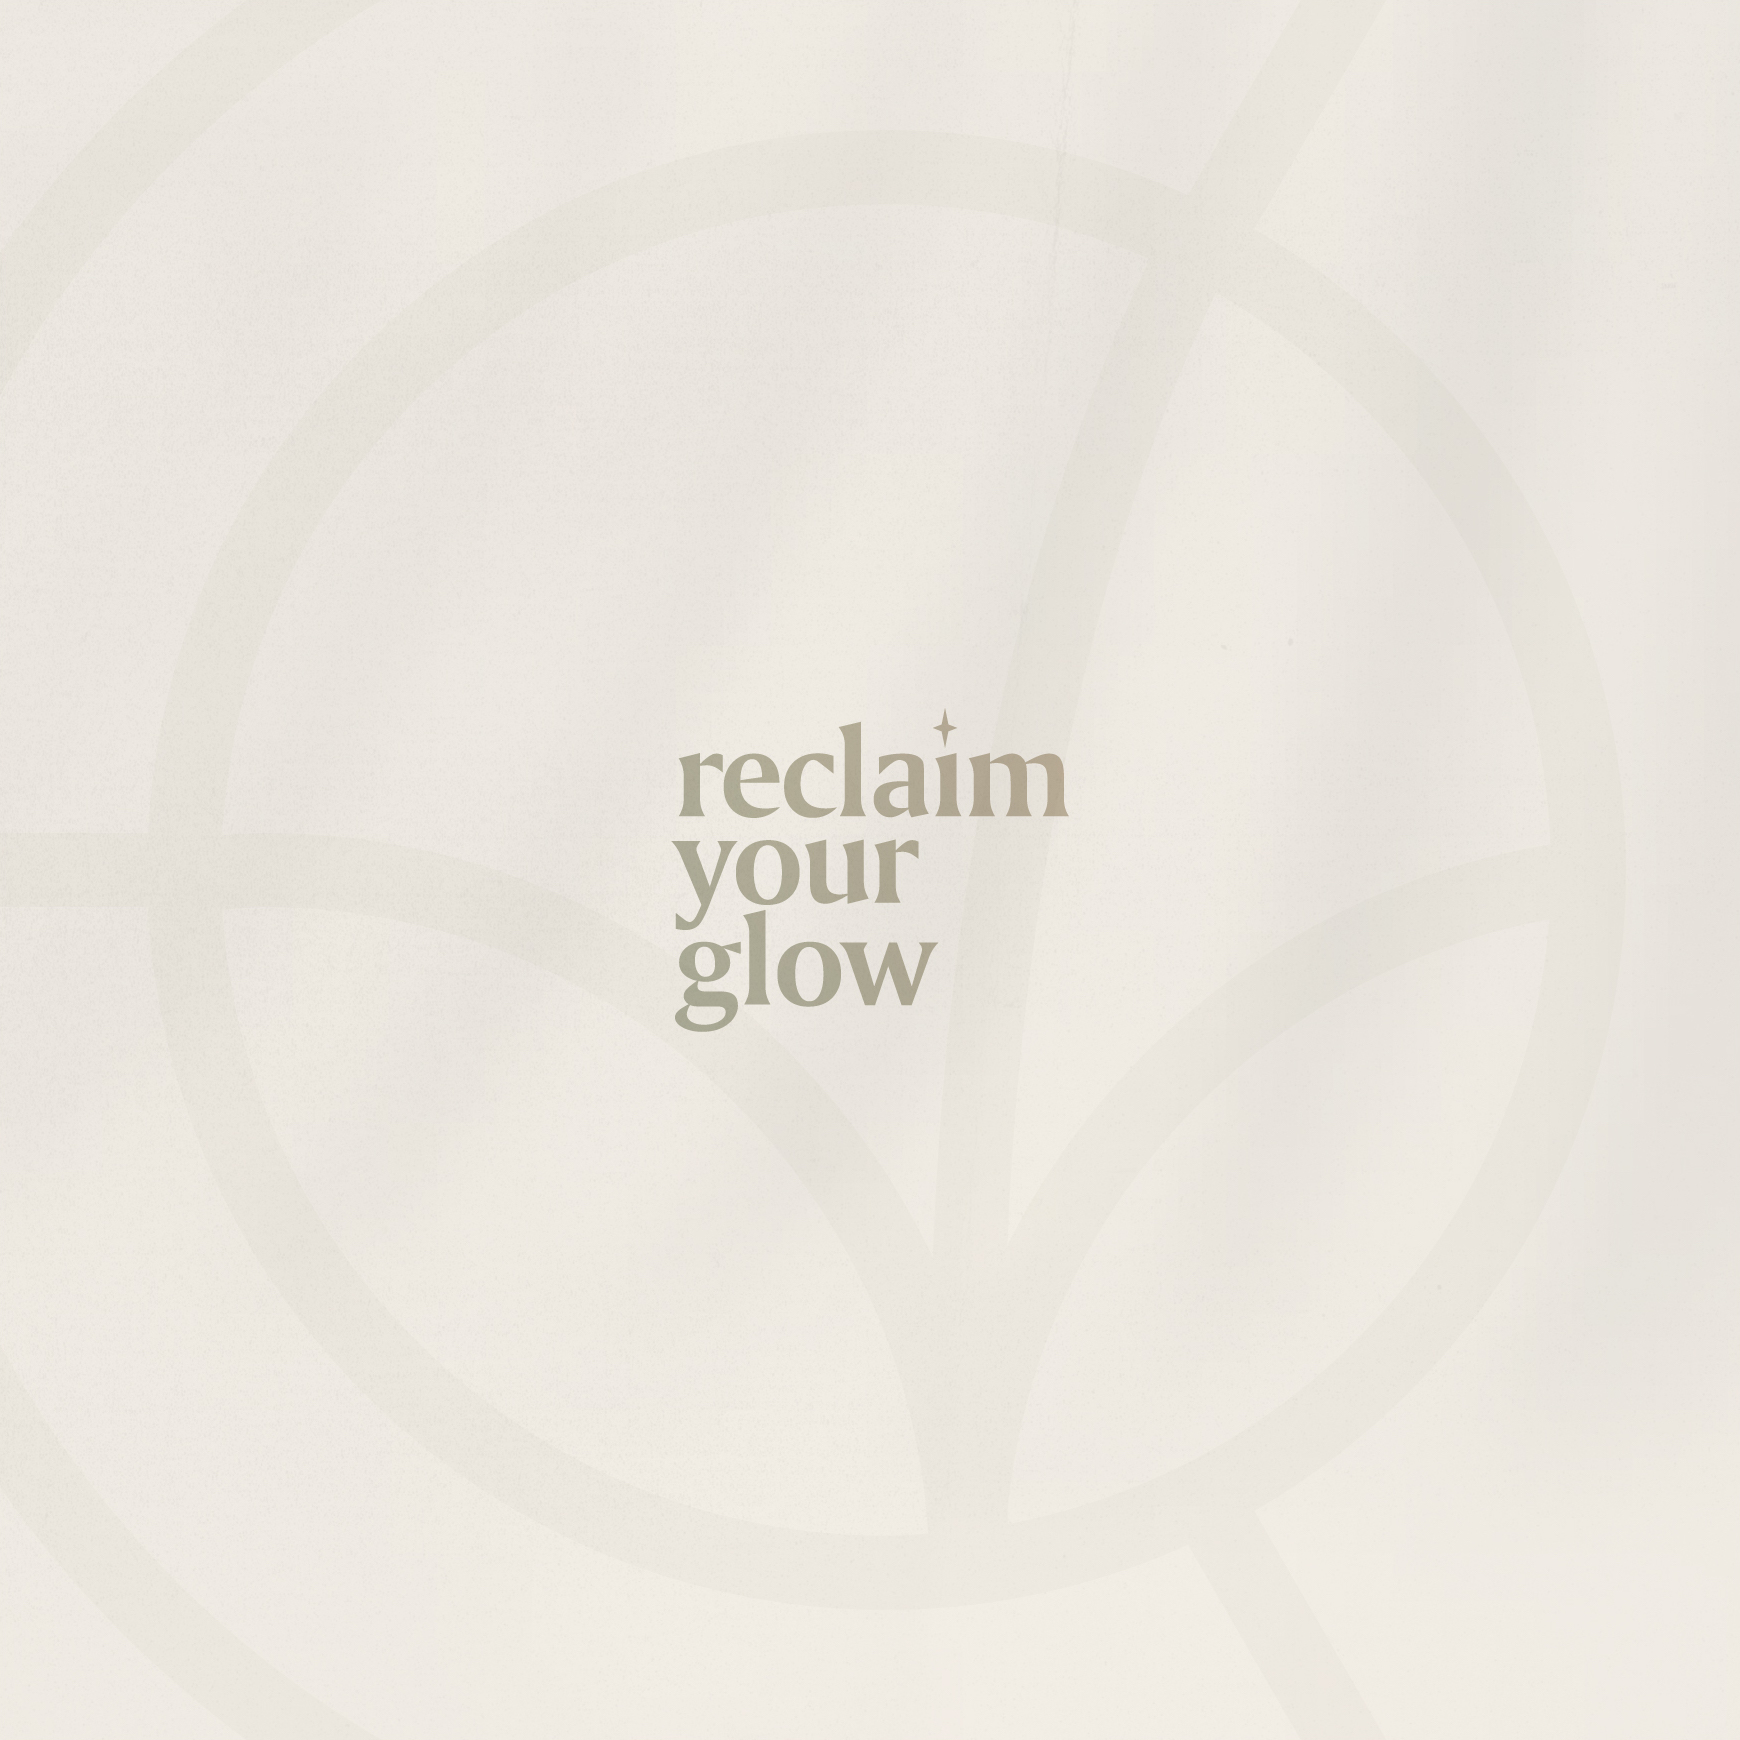 Skin color background with the words reclaim your glow.